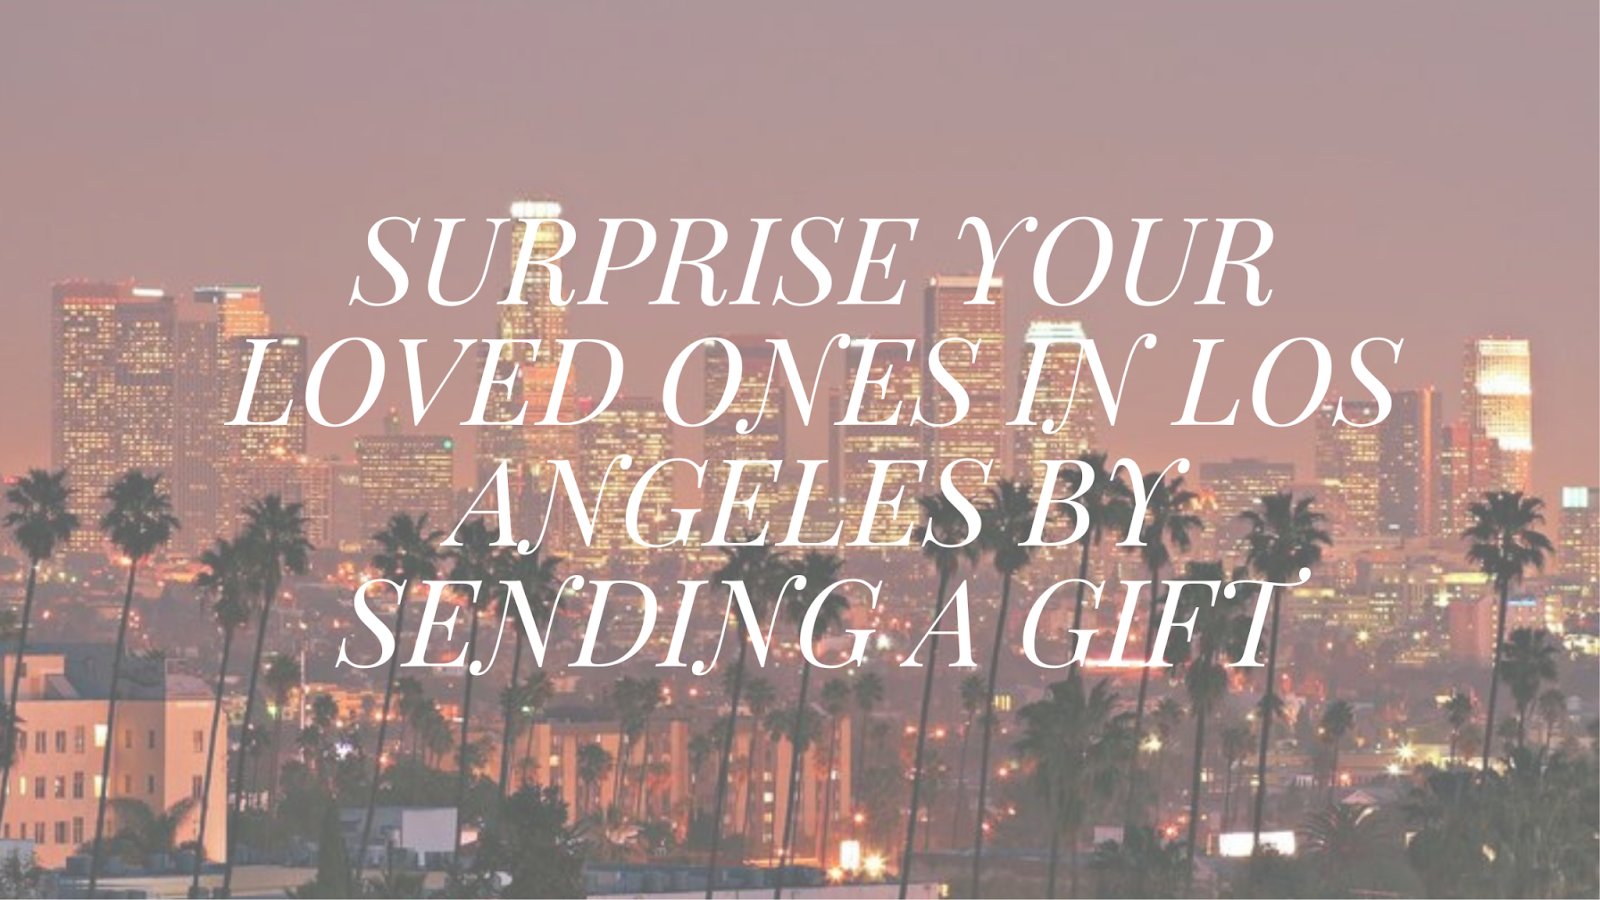 Surprise Your Loved Ones In Los Angeles By Sending A Gift 